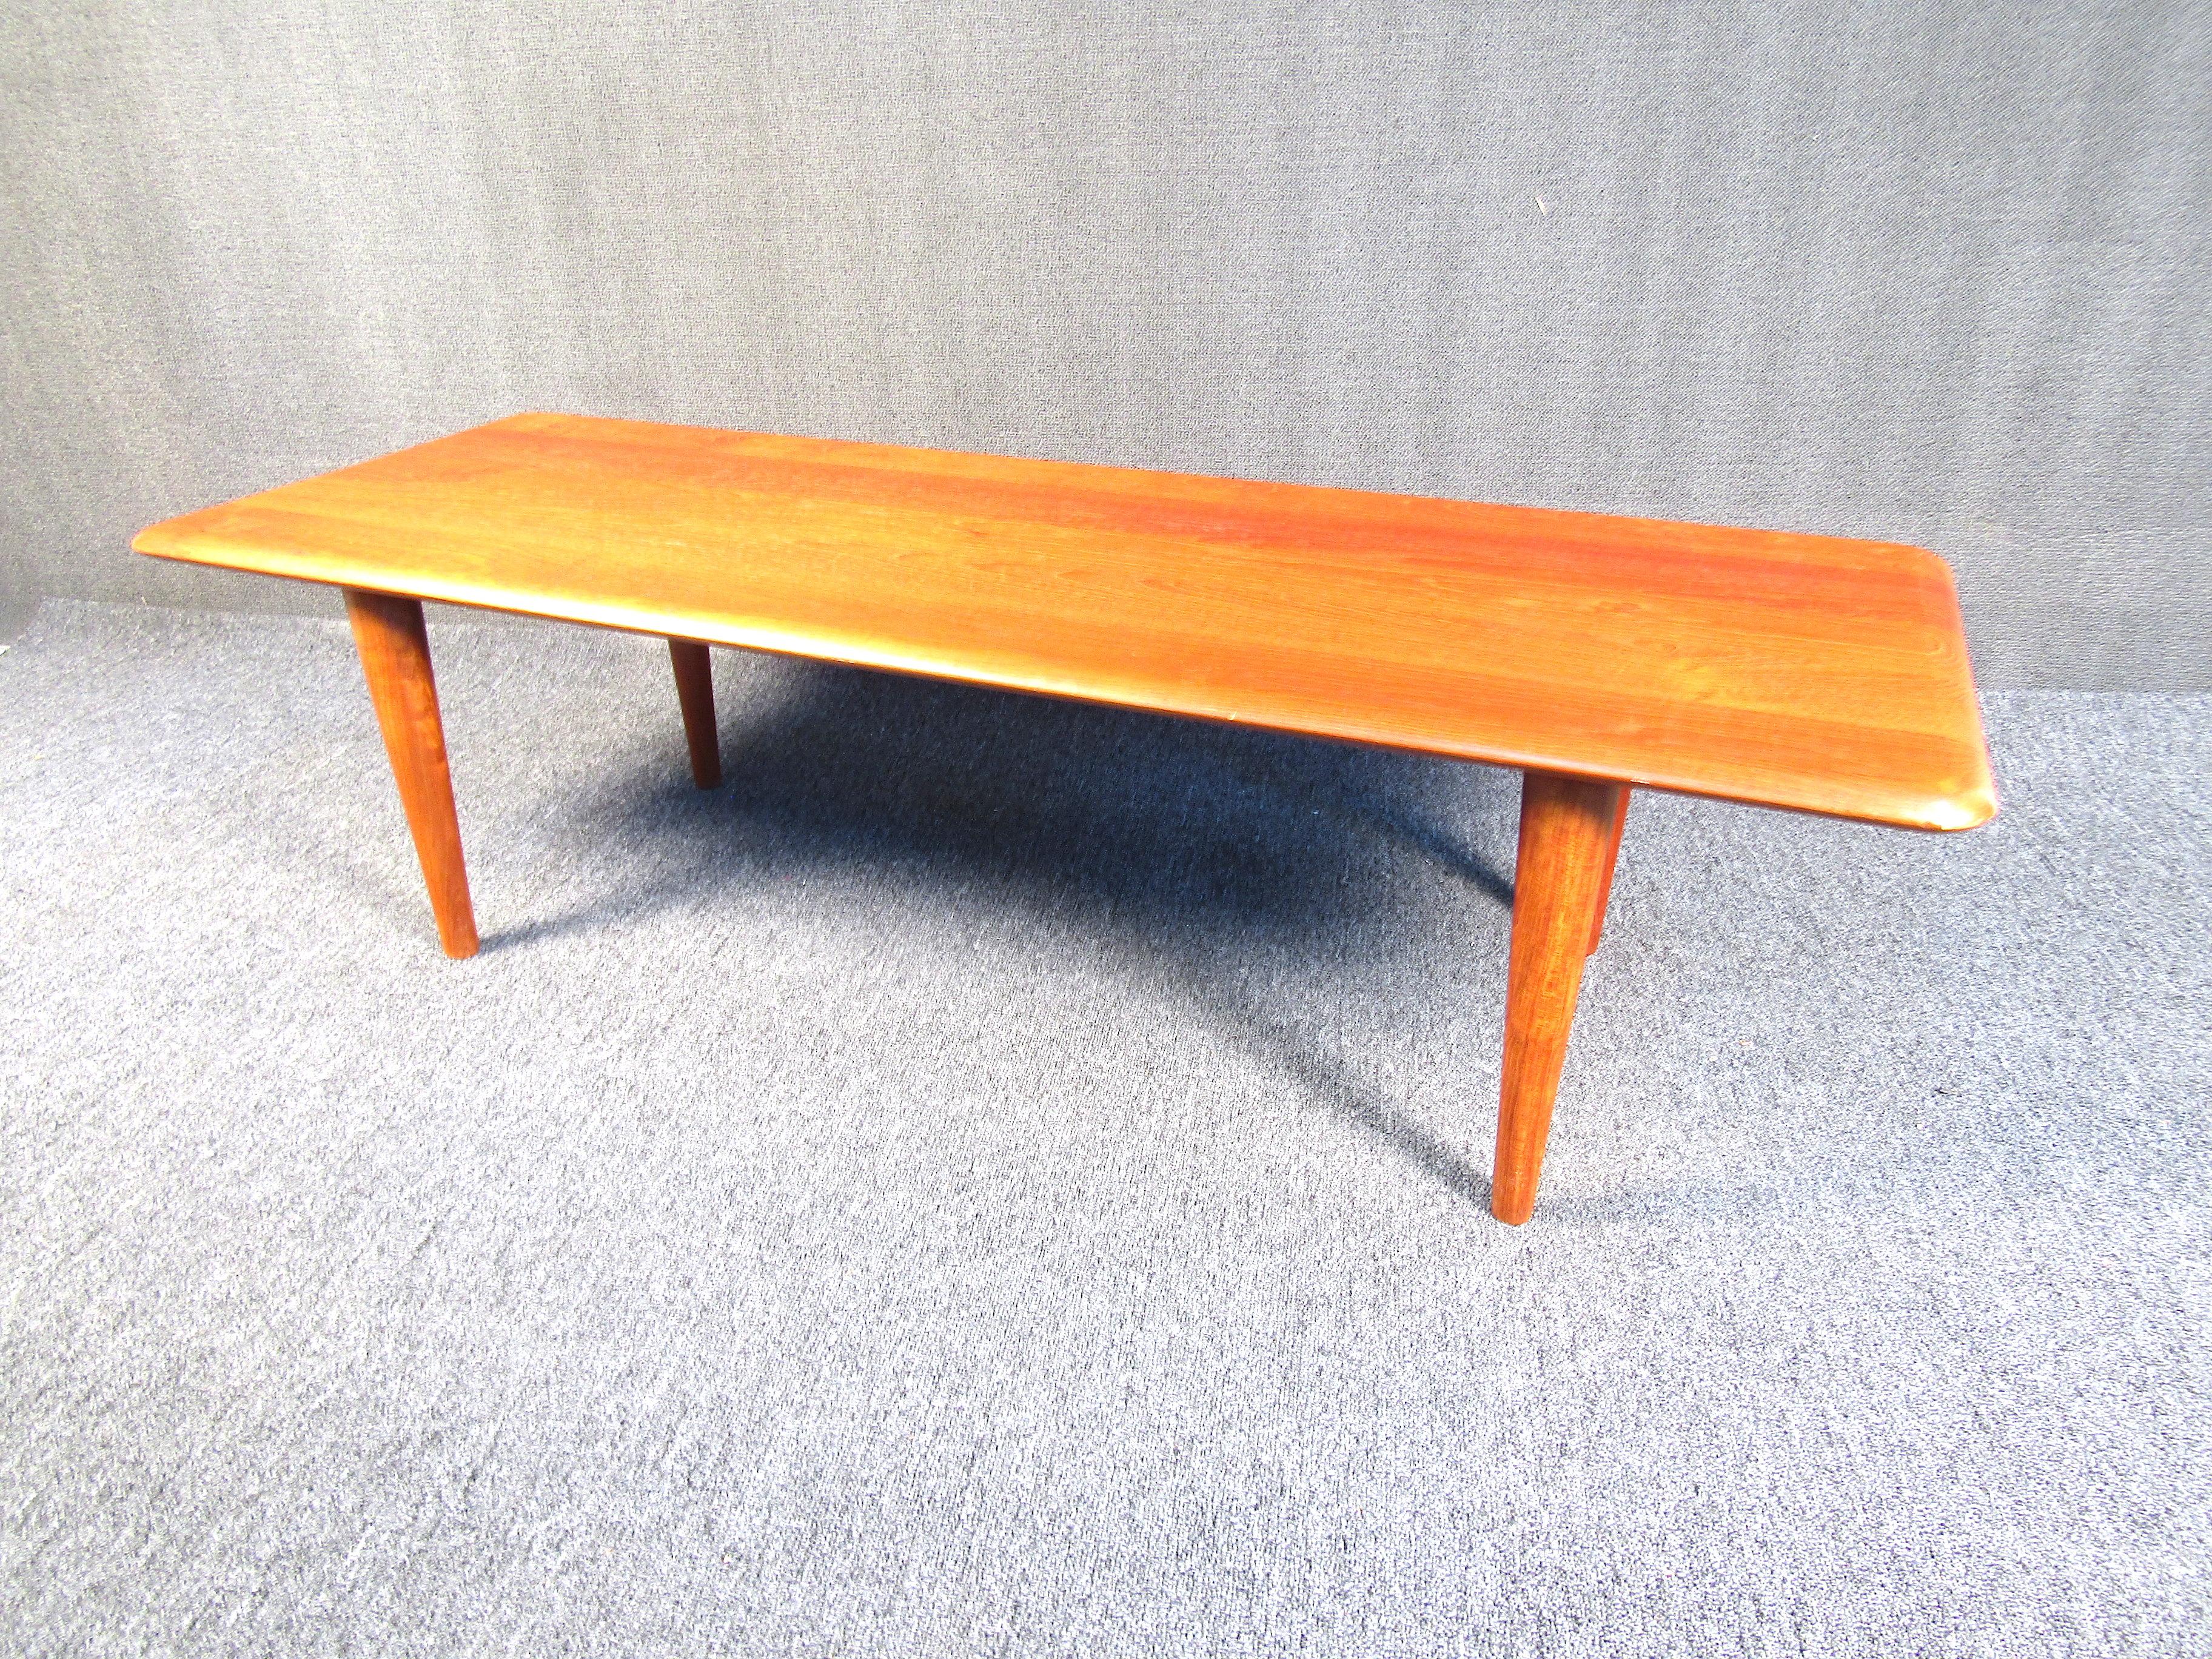 This beautiful teak wood coffee table is perfect for your living or sitting room. With deep wood grain patterns and ample surface space, this table is sure to make a statement. Please confirm the item location with the dealer. (NJ/NY).